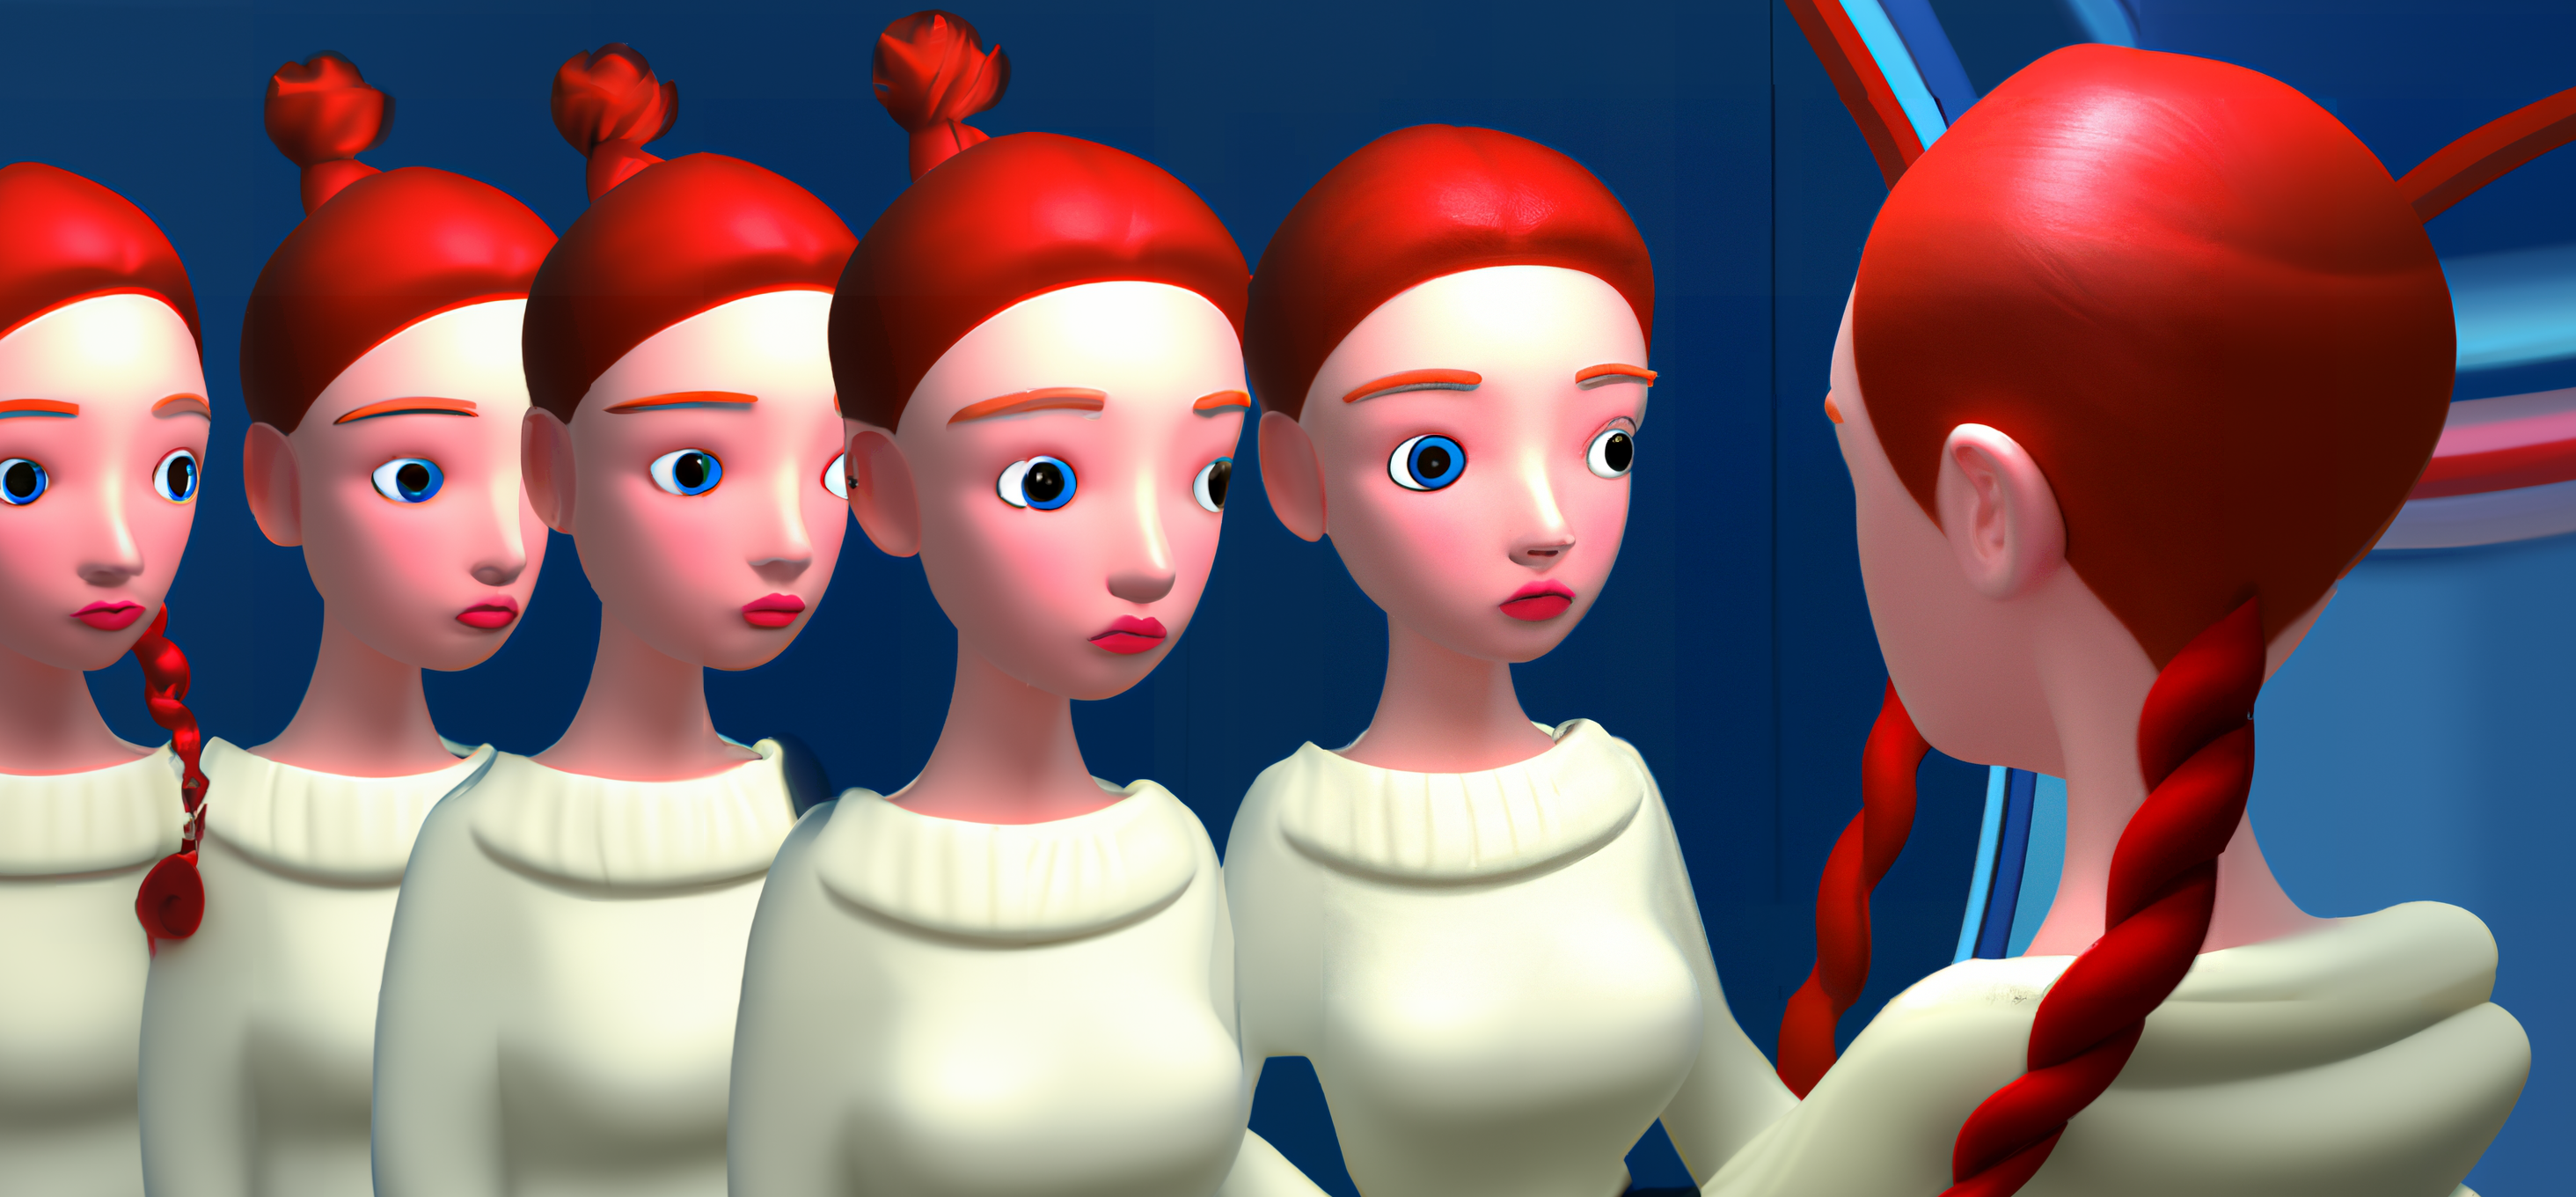 Holly Herndon & Mathew Dryhurst (Holly Herndon Clones in a 3D animation style produced with DALL·E 2) 